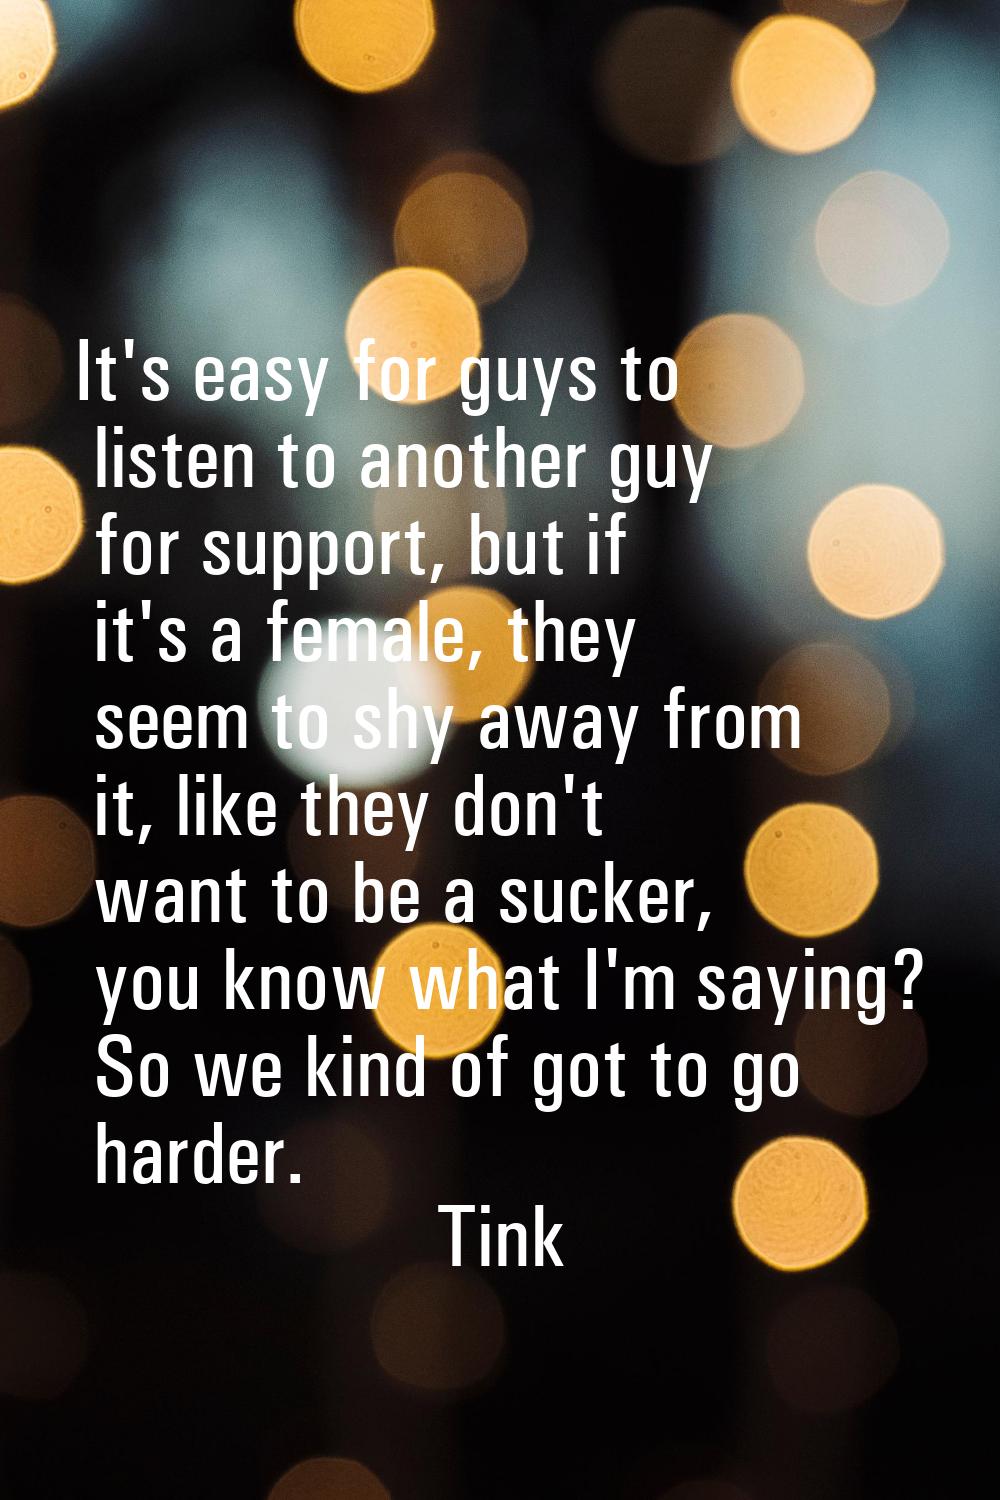 It's easy for guys to listen to another guy for support, but if it's a female, they seem to shy awa